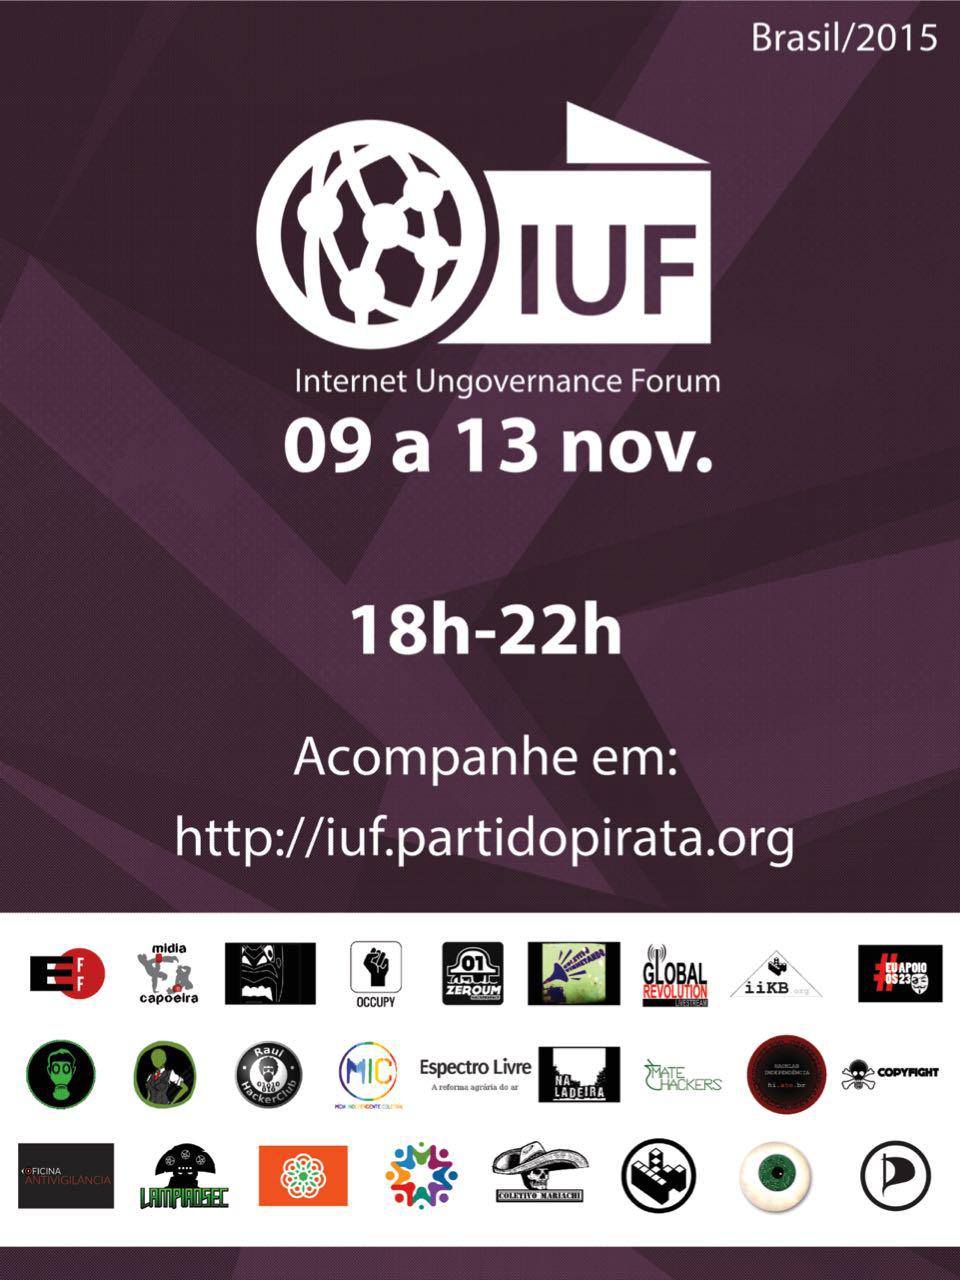 The Internet Ungovernance Forum Opens in Brazil